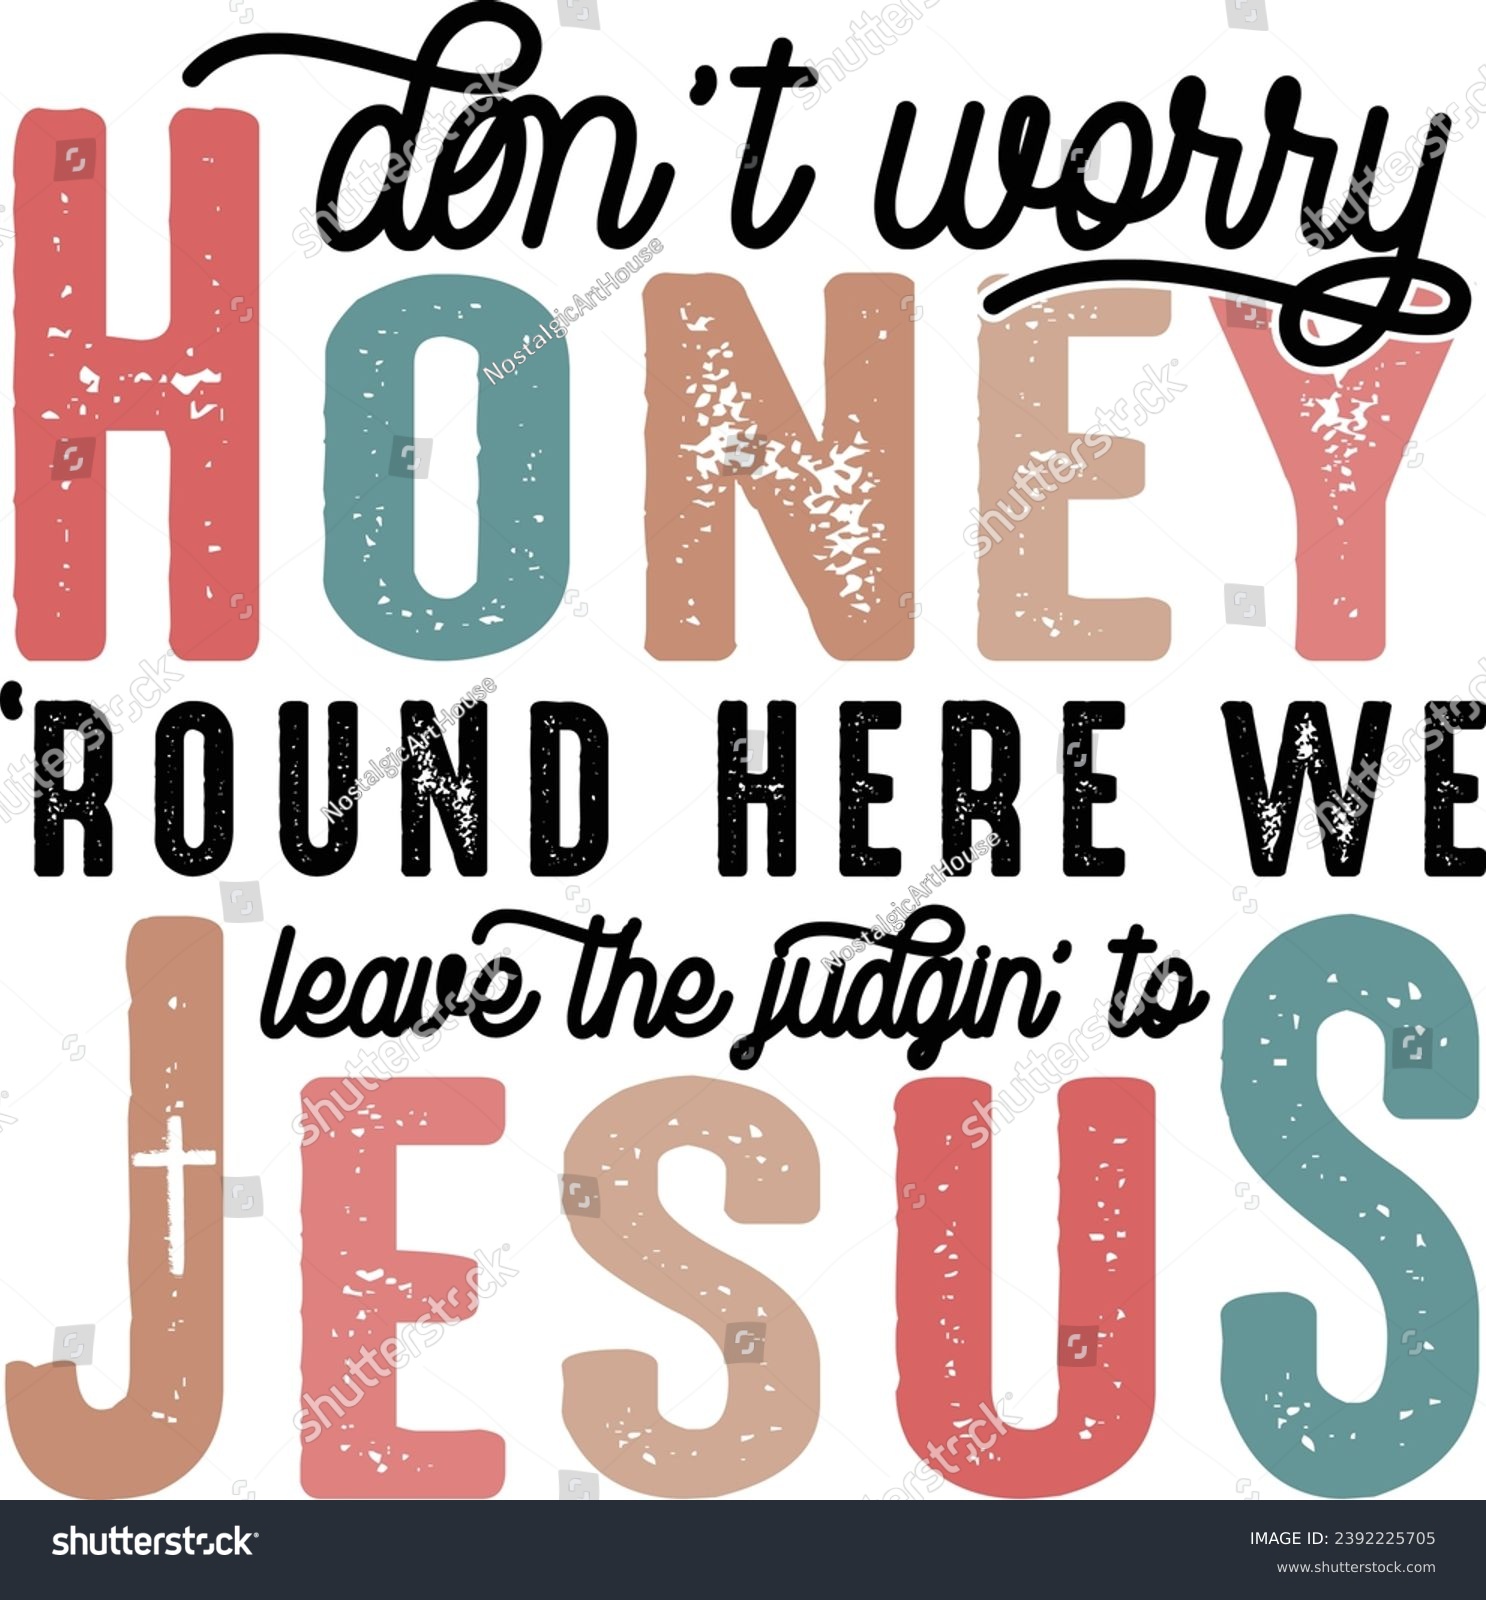 SVG of Don't Worry Honey Round Here We Leave the Judgin' to Jesus, Christian Country Western Rodeo, Love Like Jesus svg